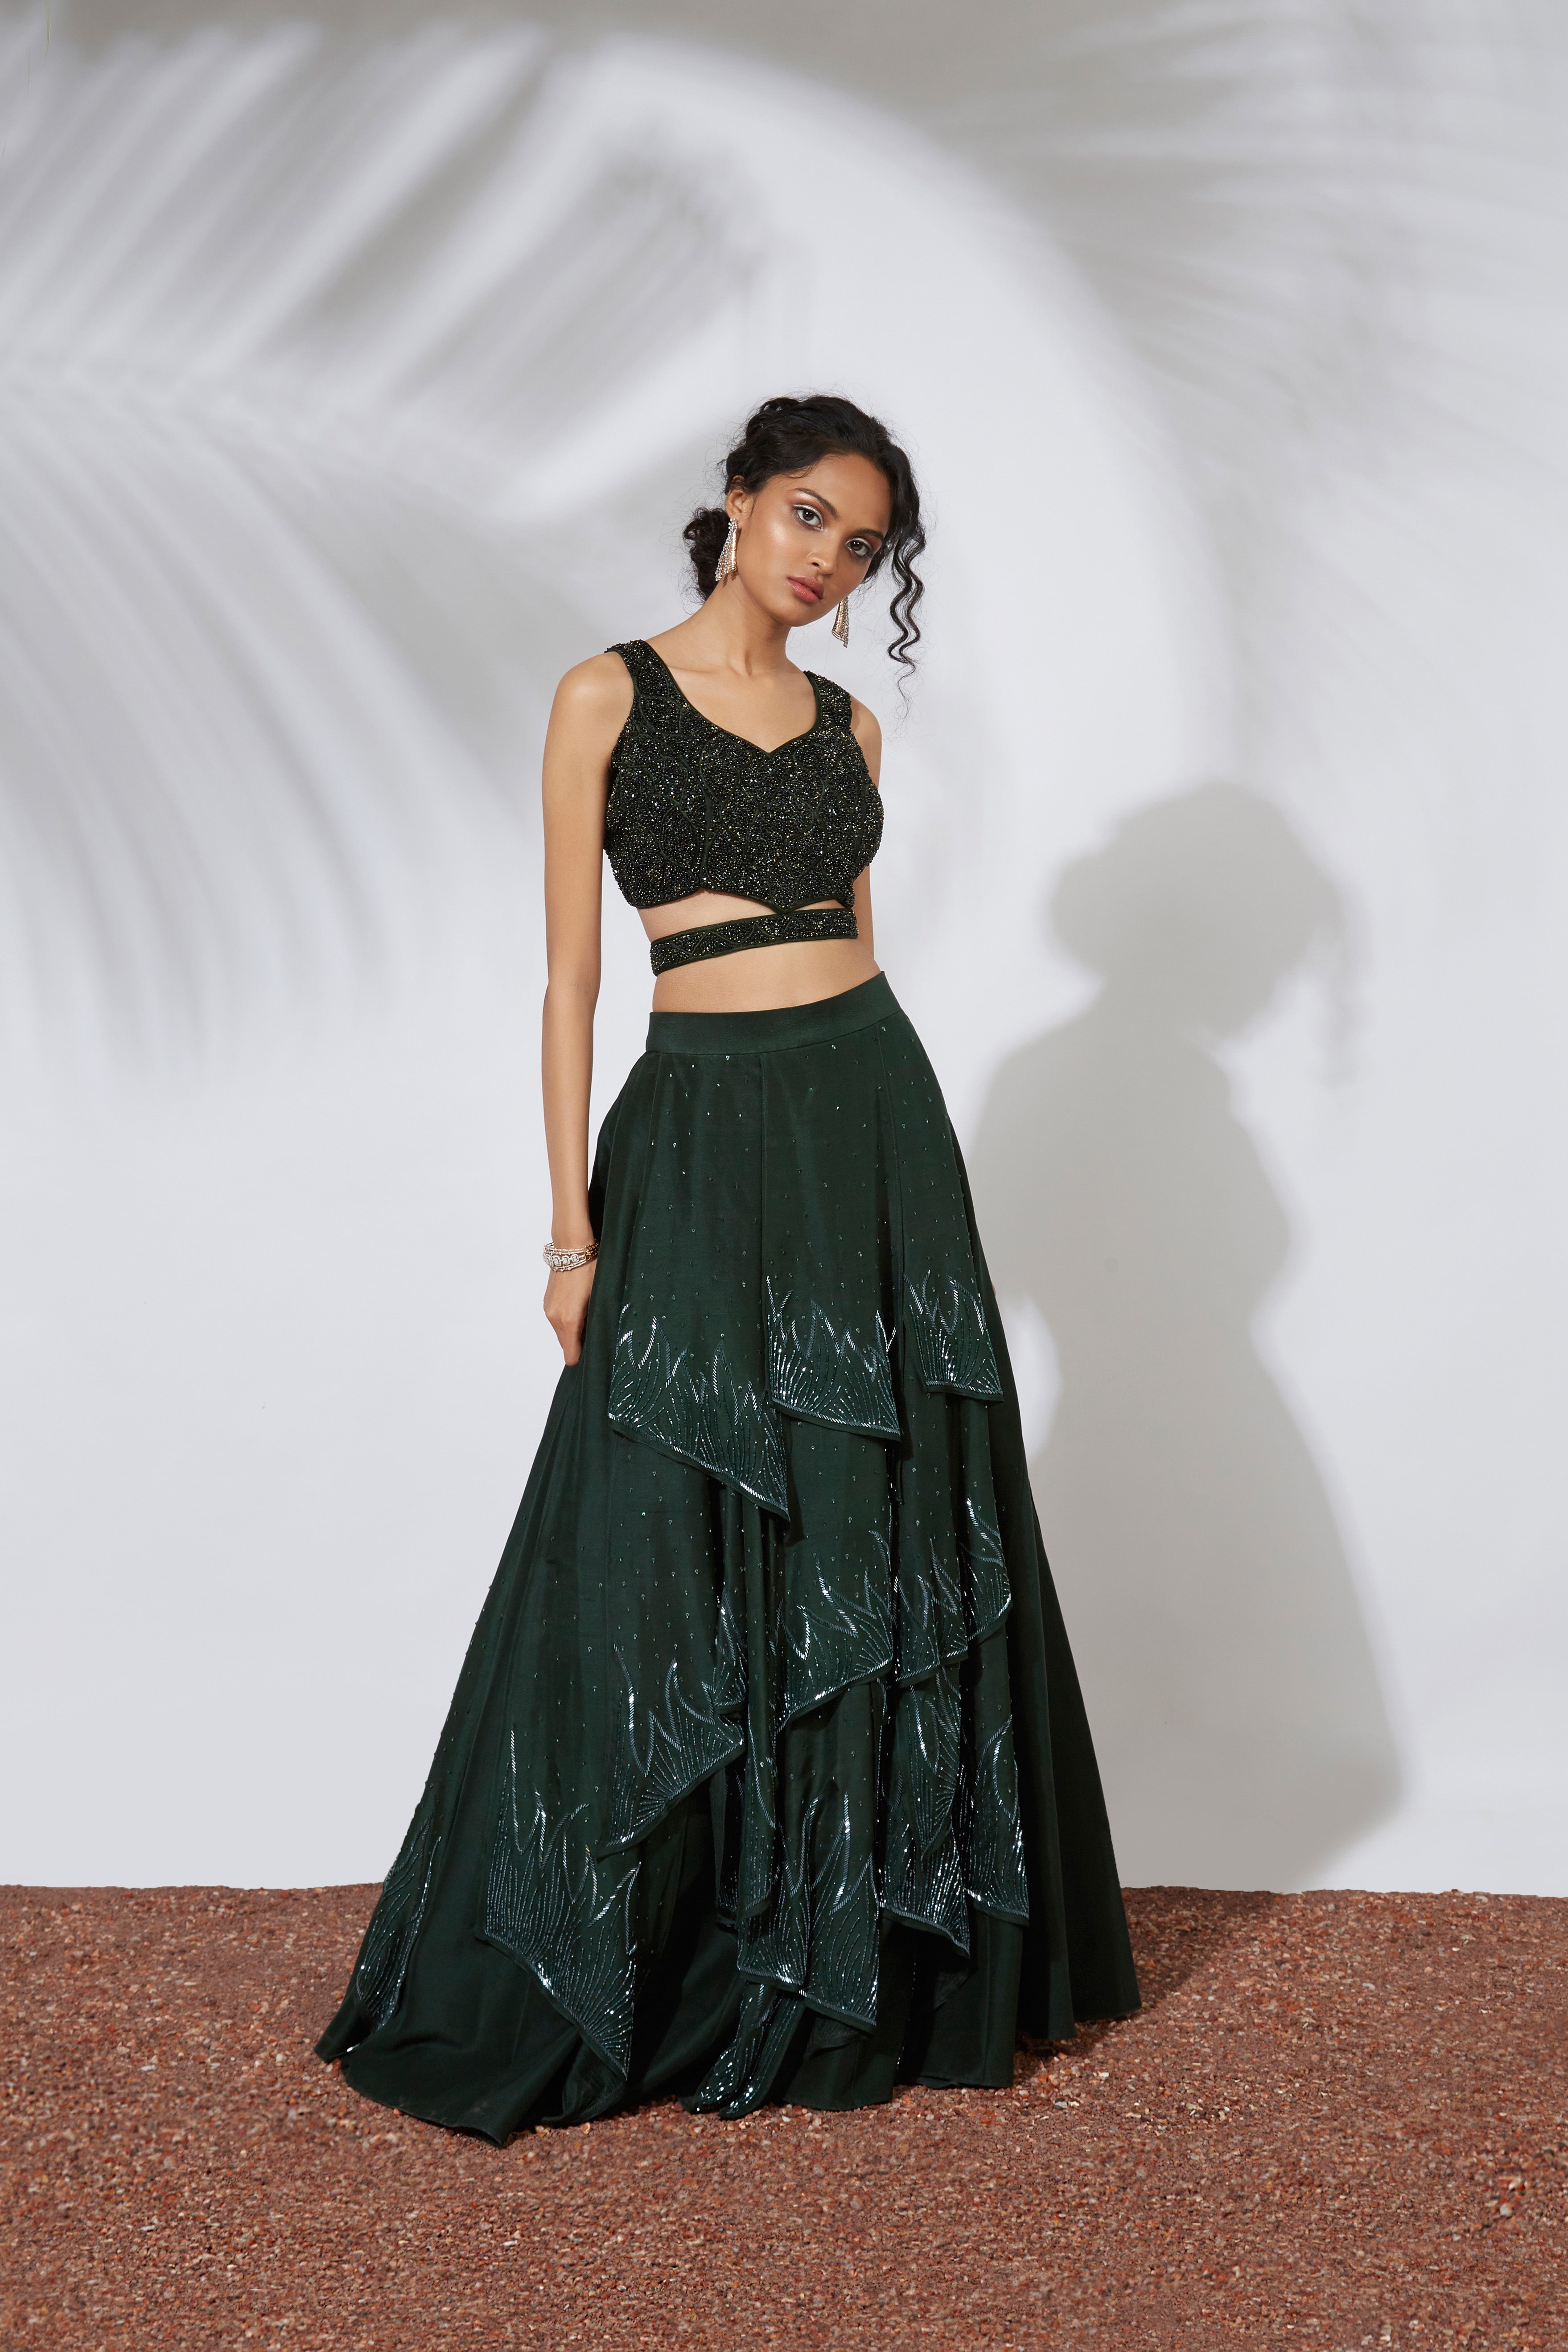 Mehak Murpana - Forest Green Embroidered Lehenga With Crop Top